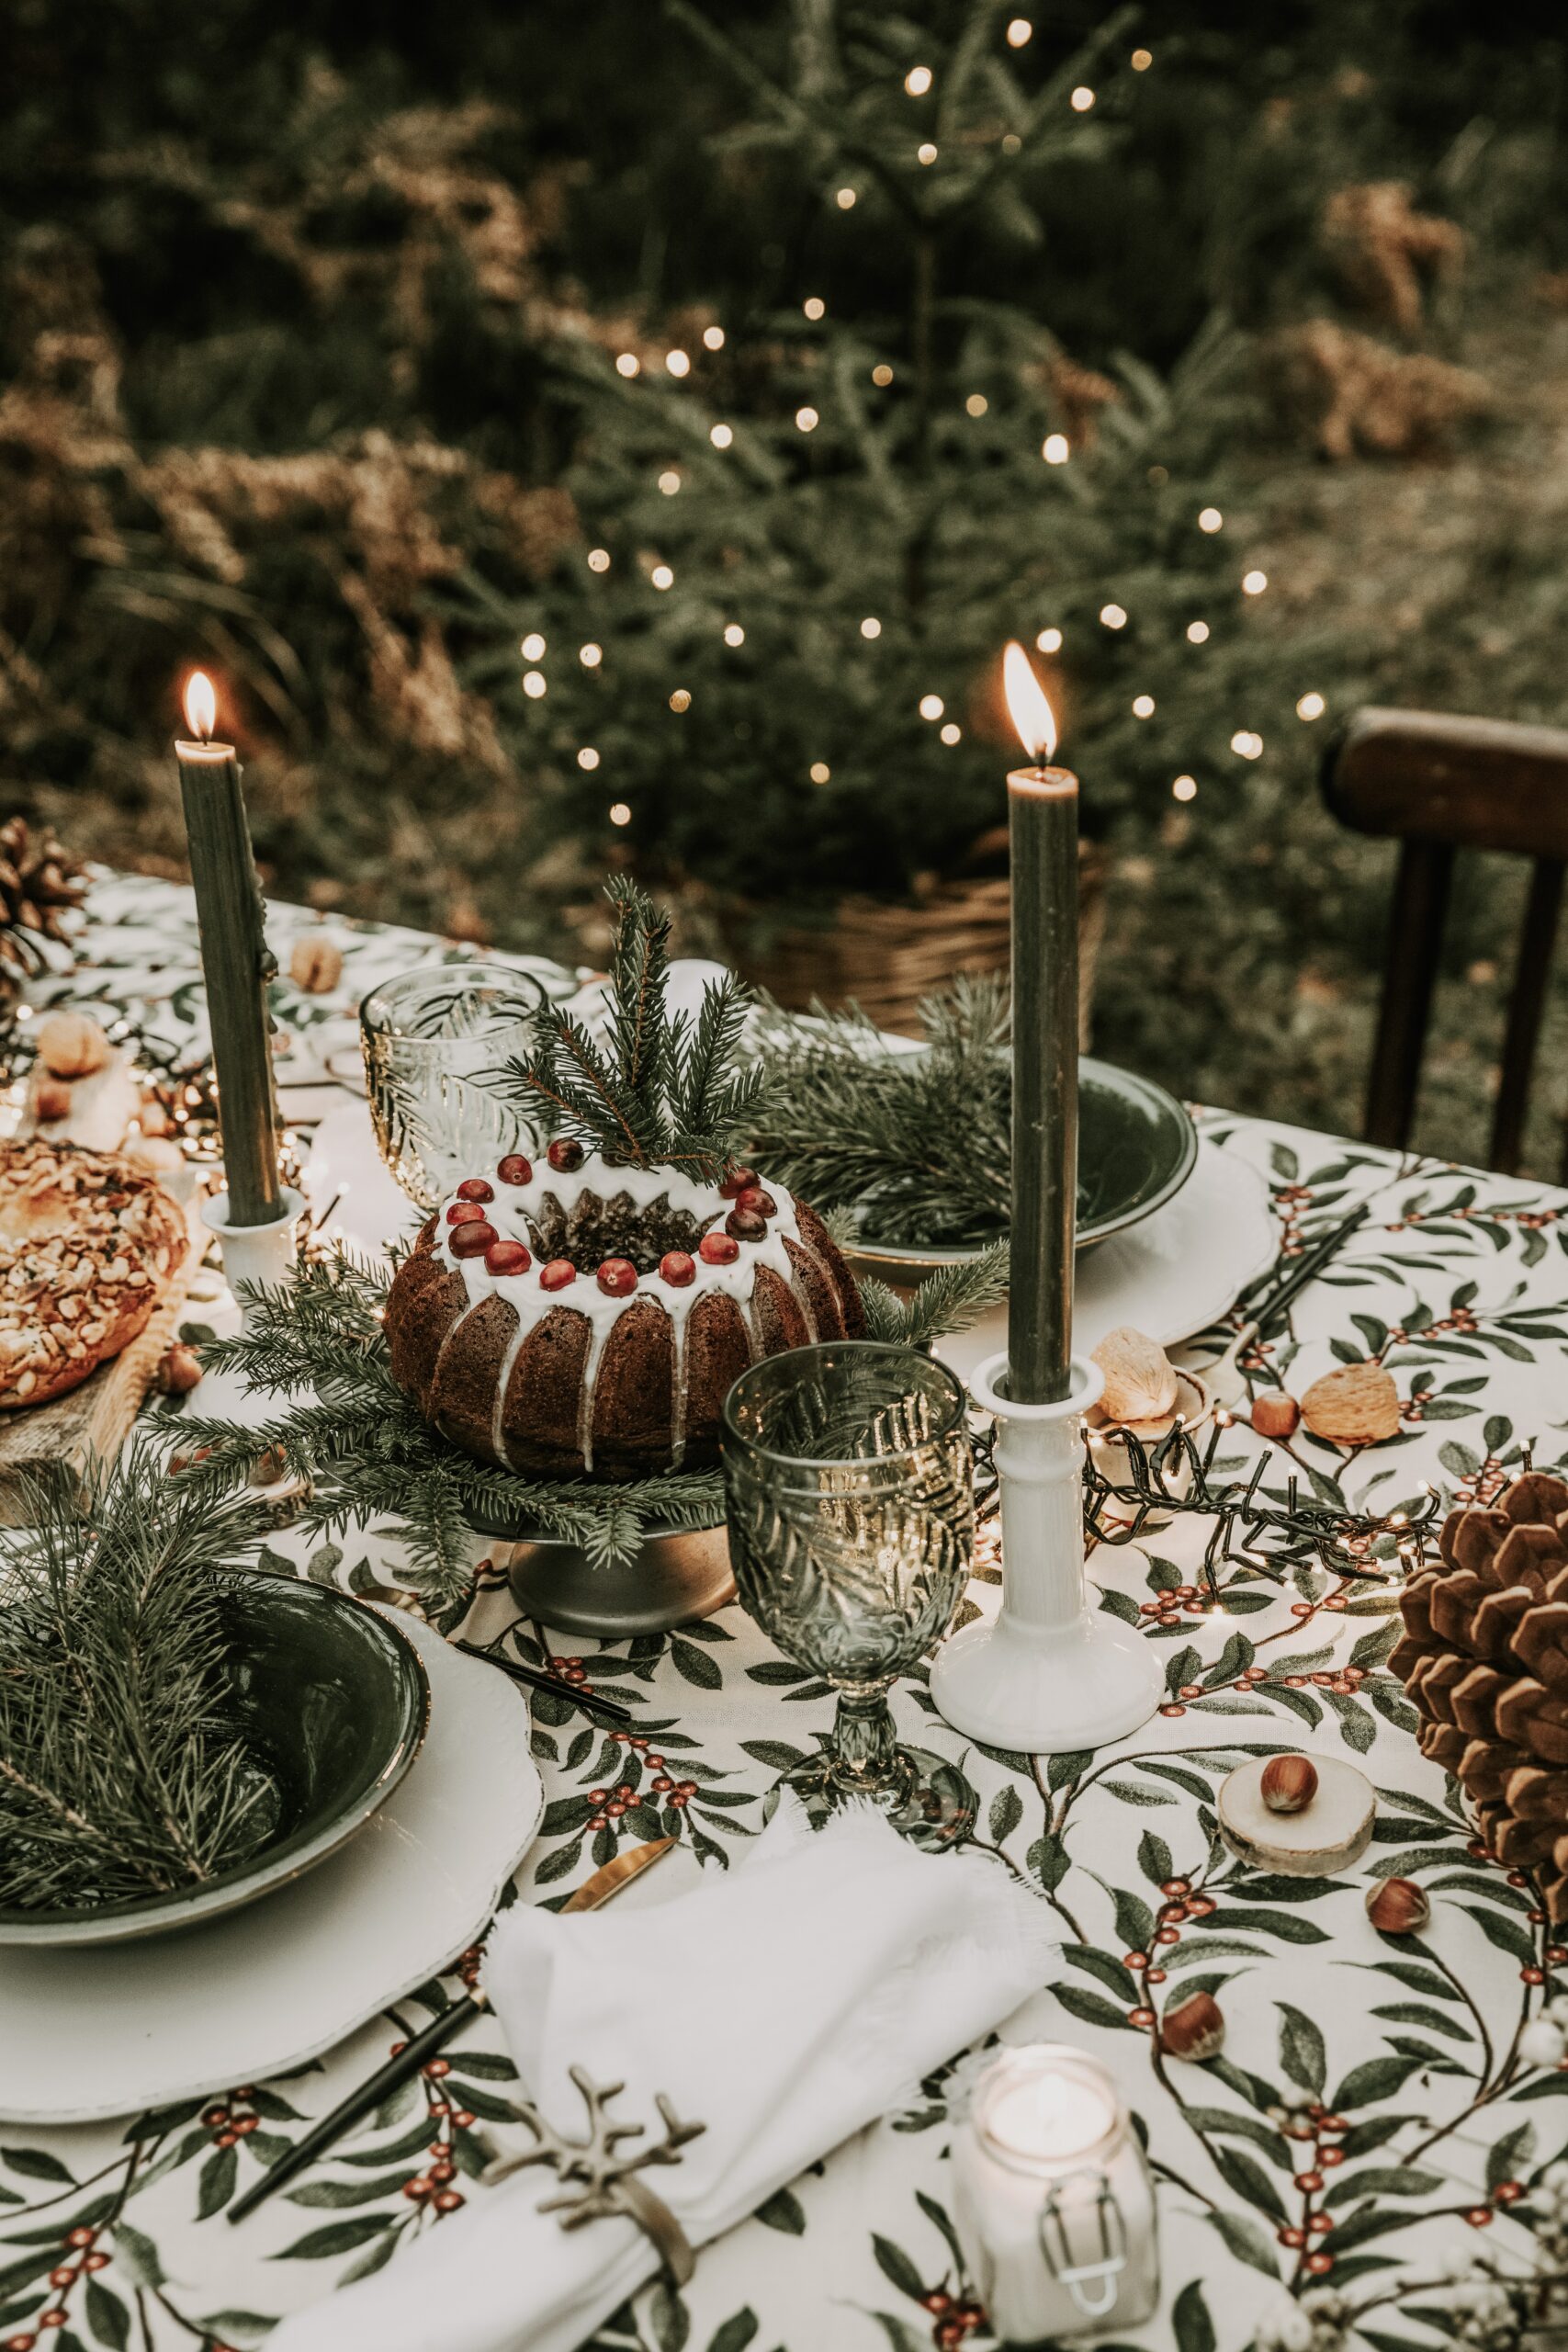 Image of a winter solstice tablescape with a cake with white icing and red fruit and lit dark green candles on a white tablecloth with a green leafy vine design. A green tree with small circle lights is in the background.